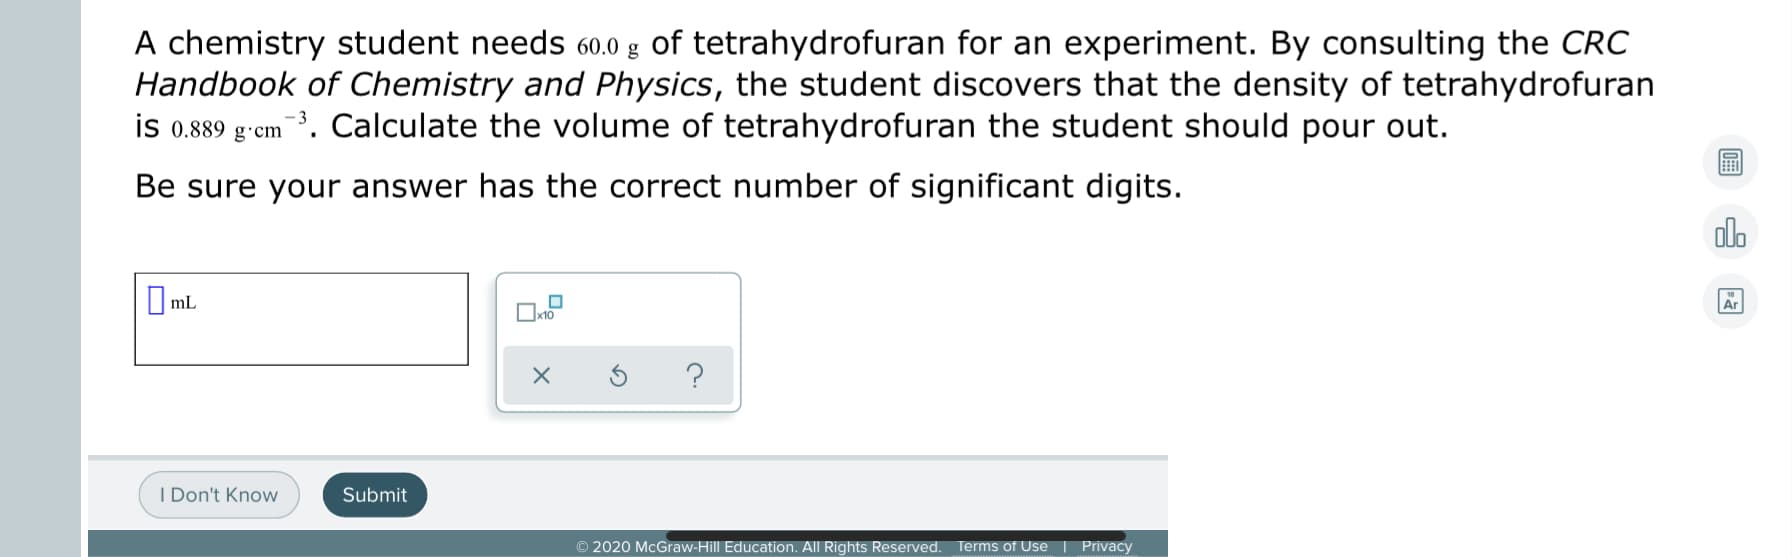 A chemistry student needs 60.0 g of tetrahydrofuran for an experiment. By consulting the CRC
Handbook of Chemistry and Physics, the student discovers that the density of tetrahydrofuran
em ¯³. Calculate the volume of tetrahydrofuran the student should pour out.
is 0.889 g·cm
Be sure your answer has the correct number of significant digits.
I mL
